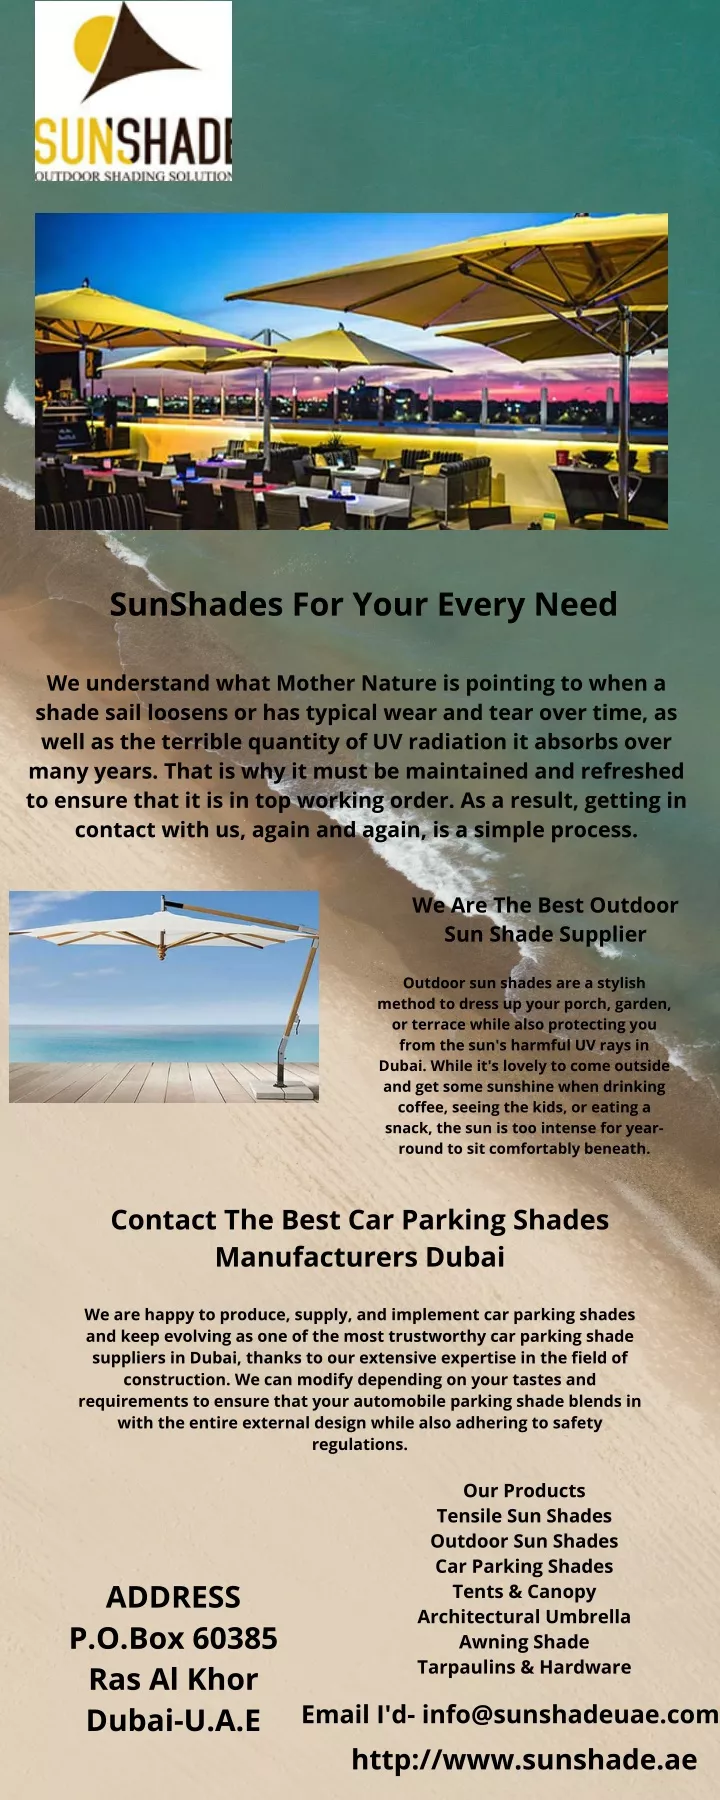 sunshades for your every need